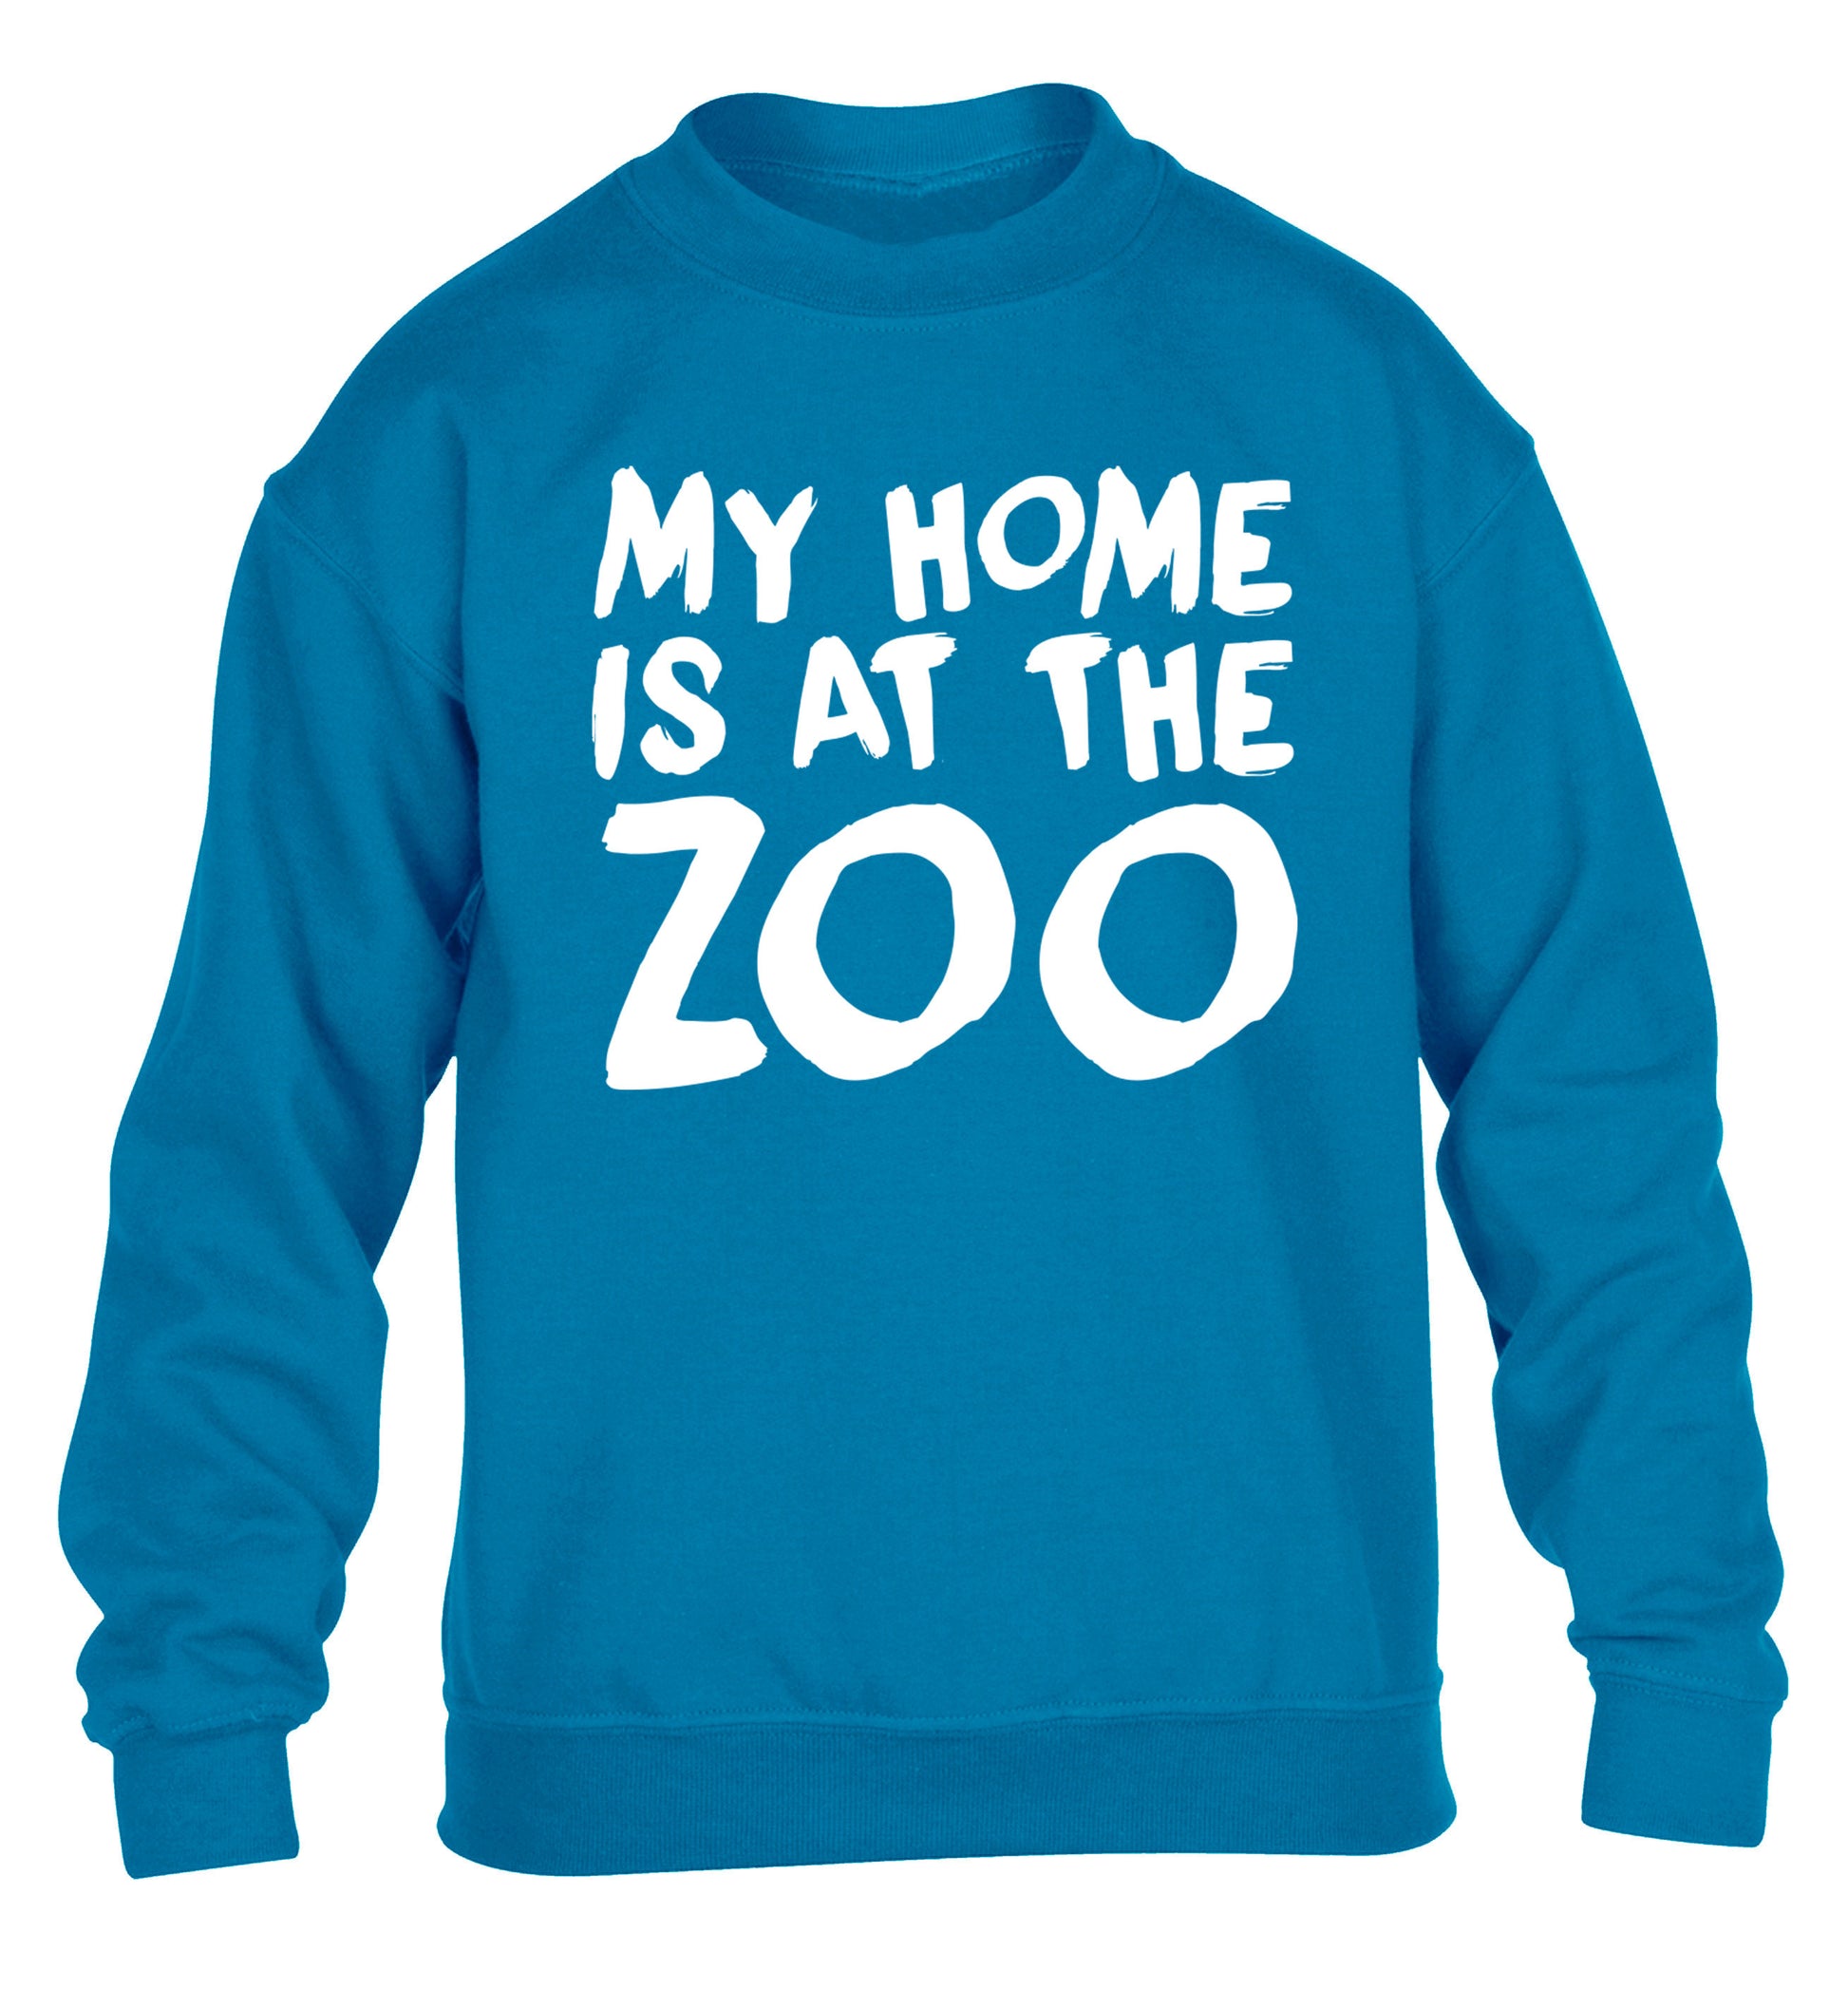 My home is at the zoo children's blue sweater 12-14 Years